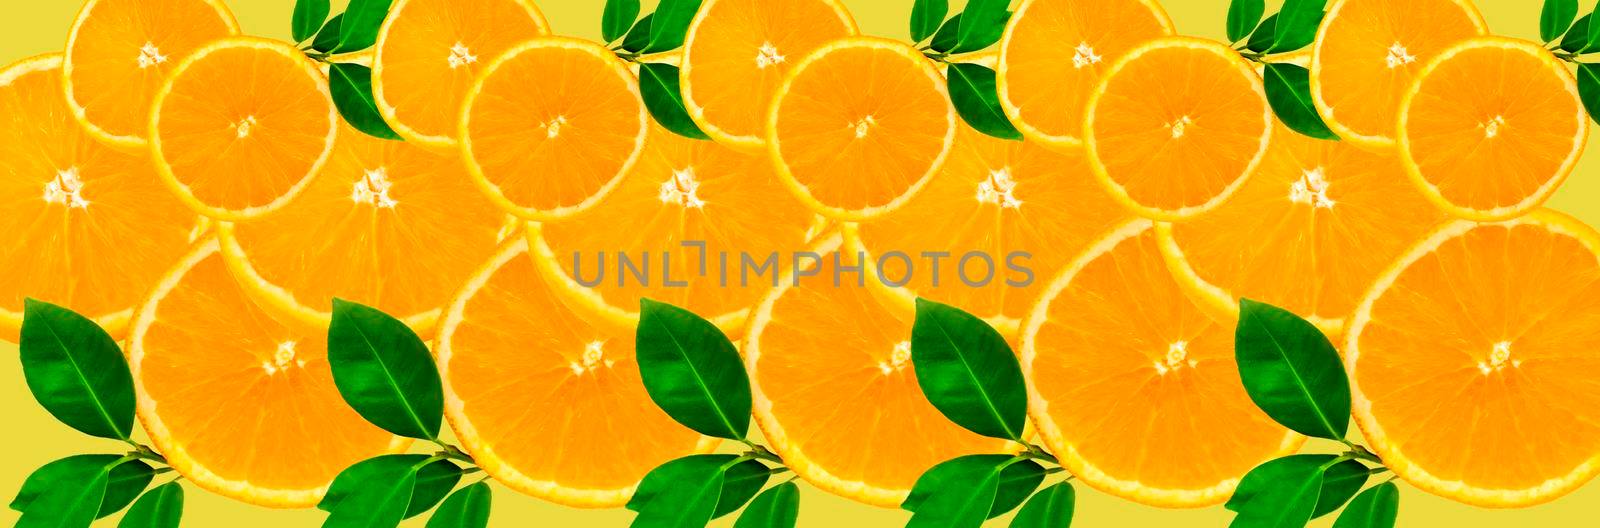 Sliced orange on a bright orange background. Oranges in the panoramic image. Panorama, a banner with space for text or insertion. Pieces of citrus fruit. Template for creative and graphic works